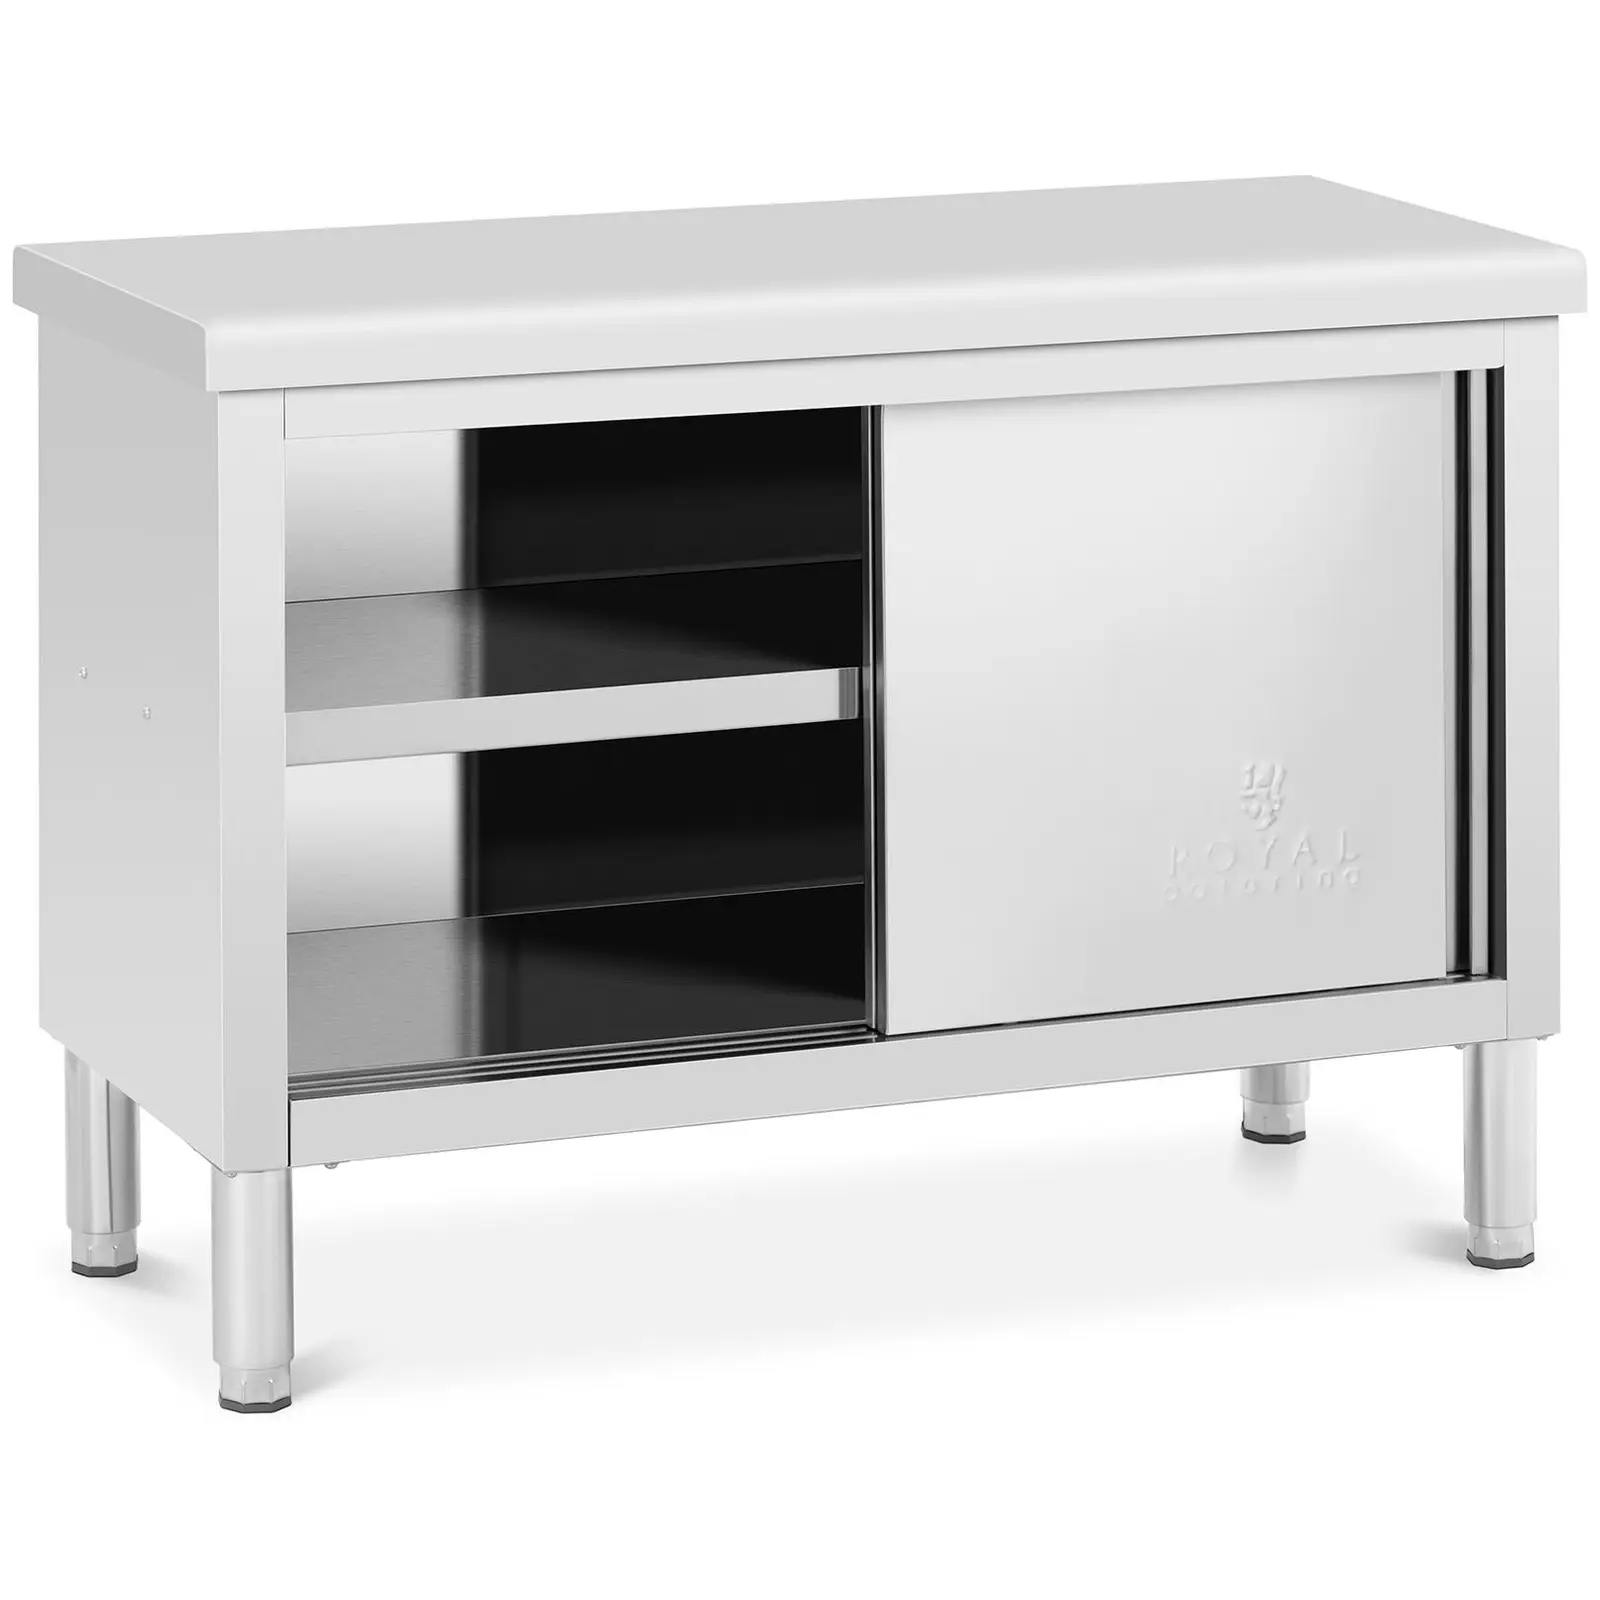 Stainless steel work cabinet - 120 x 50 cm - 390 kg capacity - Royal Catering